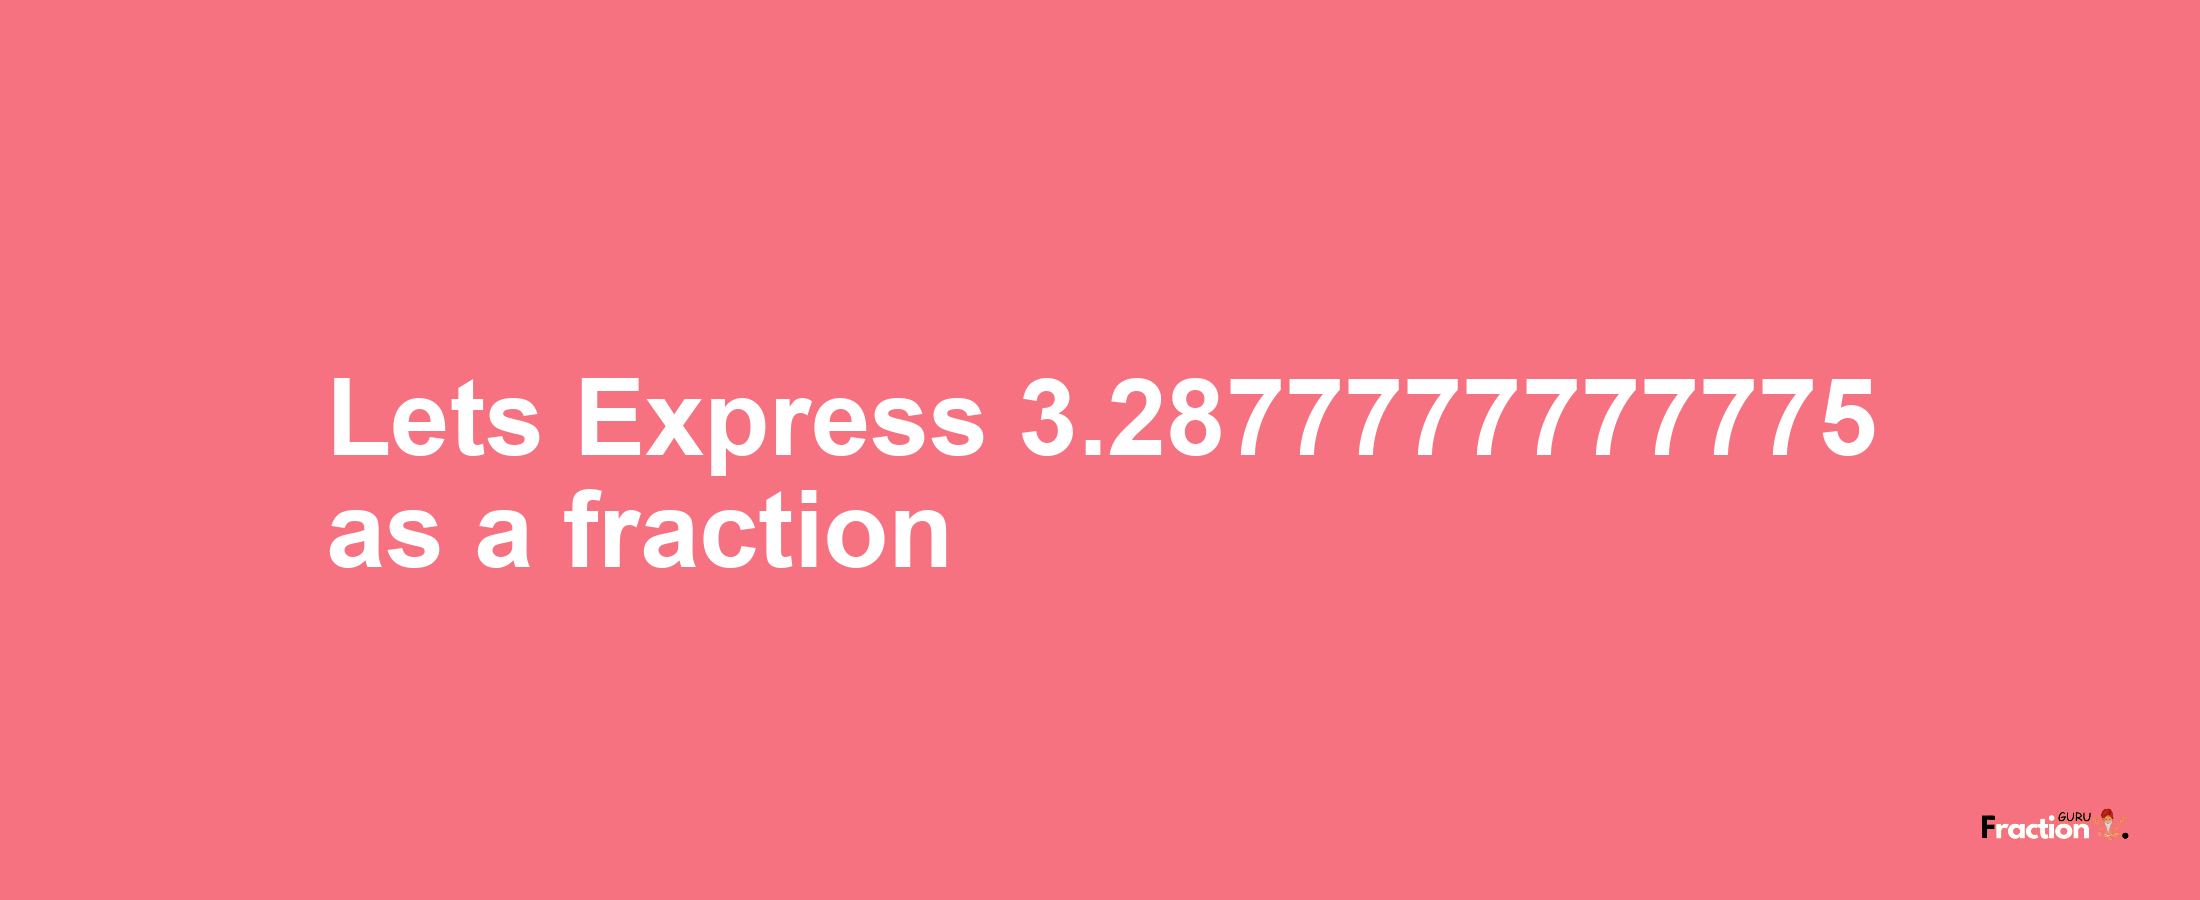 Lets Express 3.2877777777775 as afraction